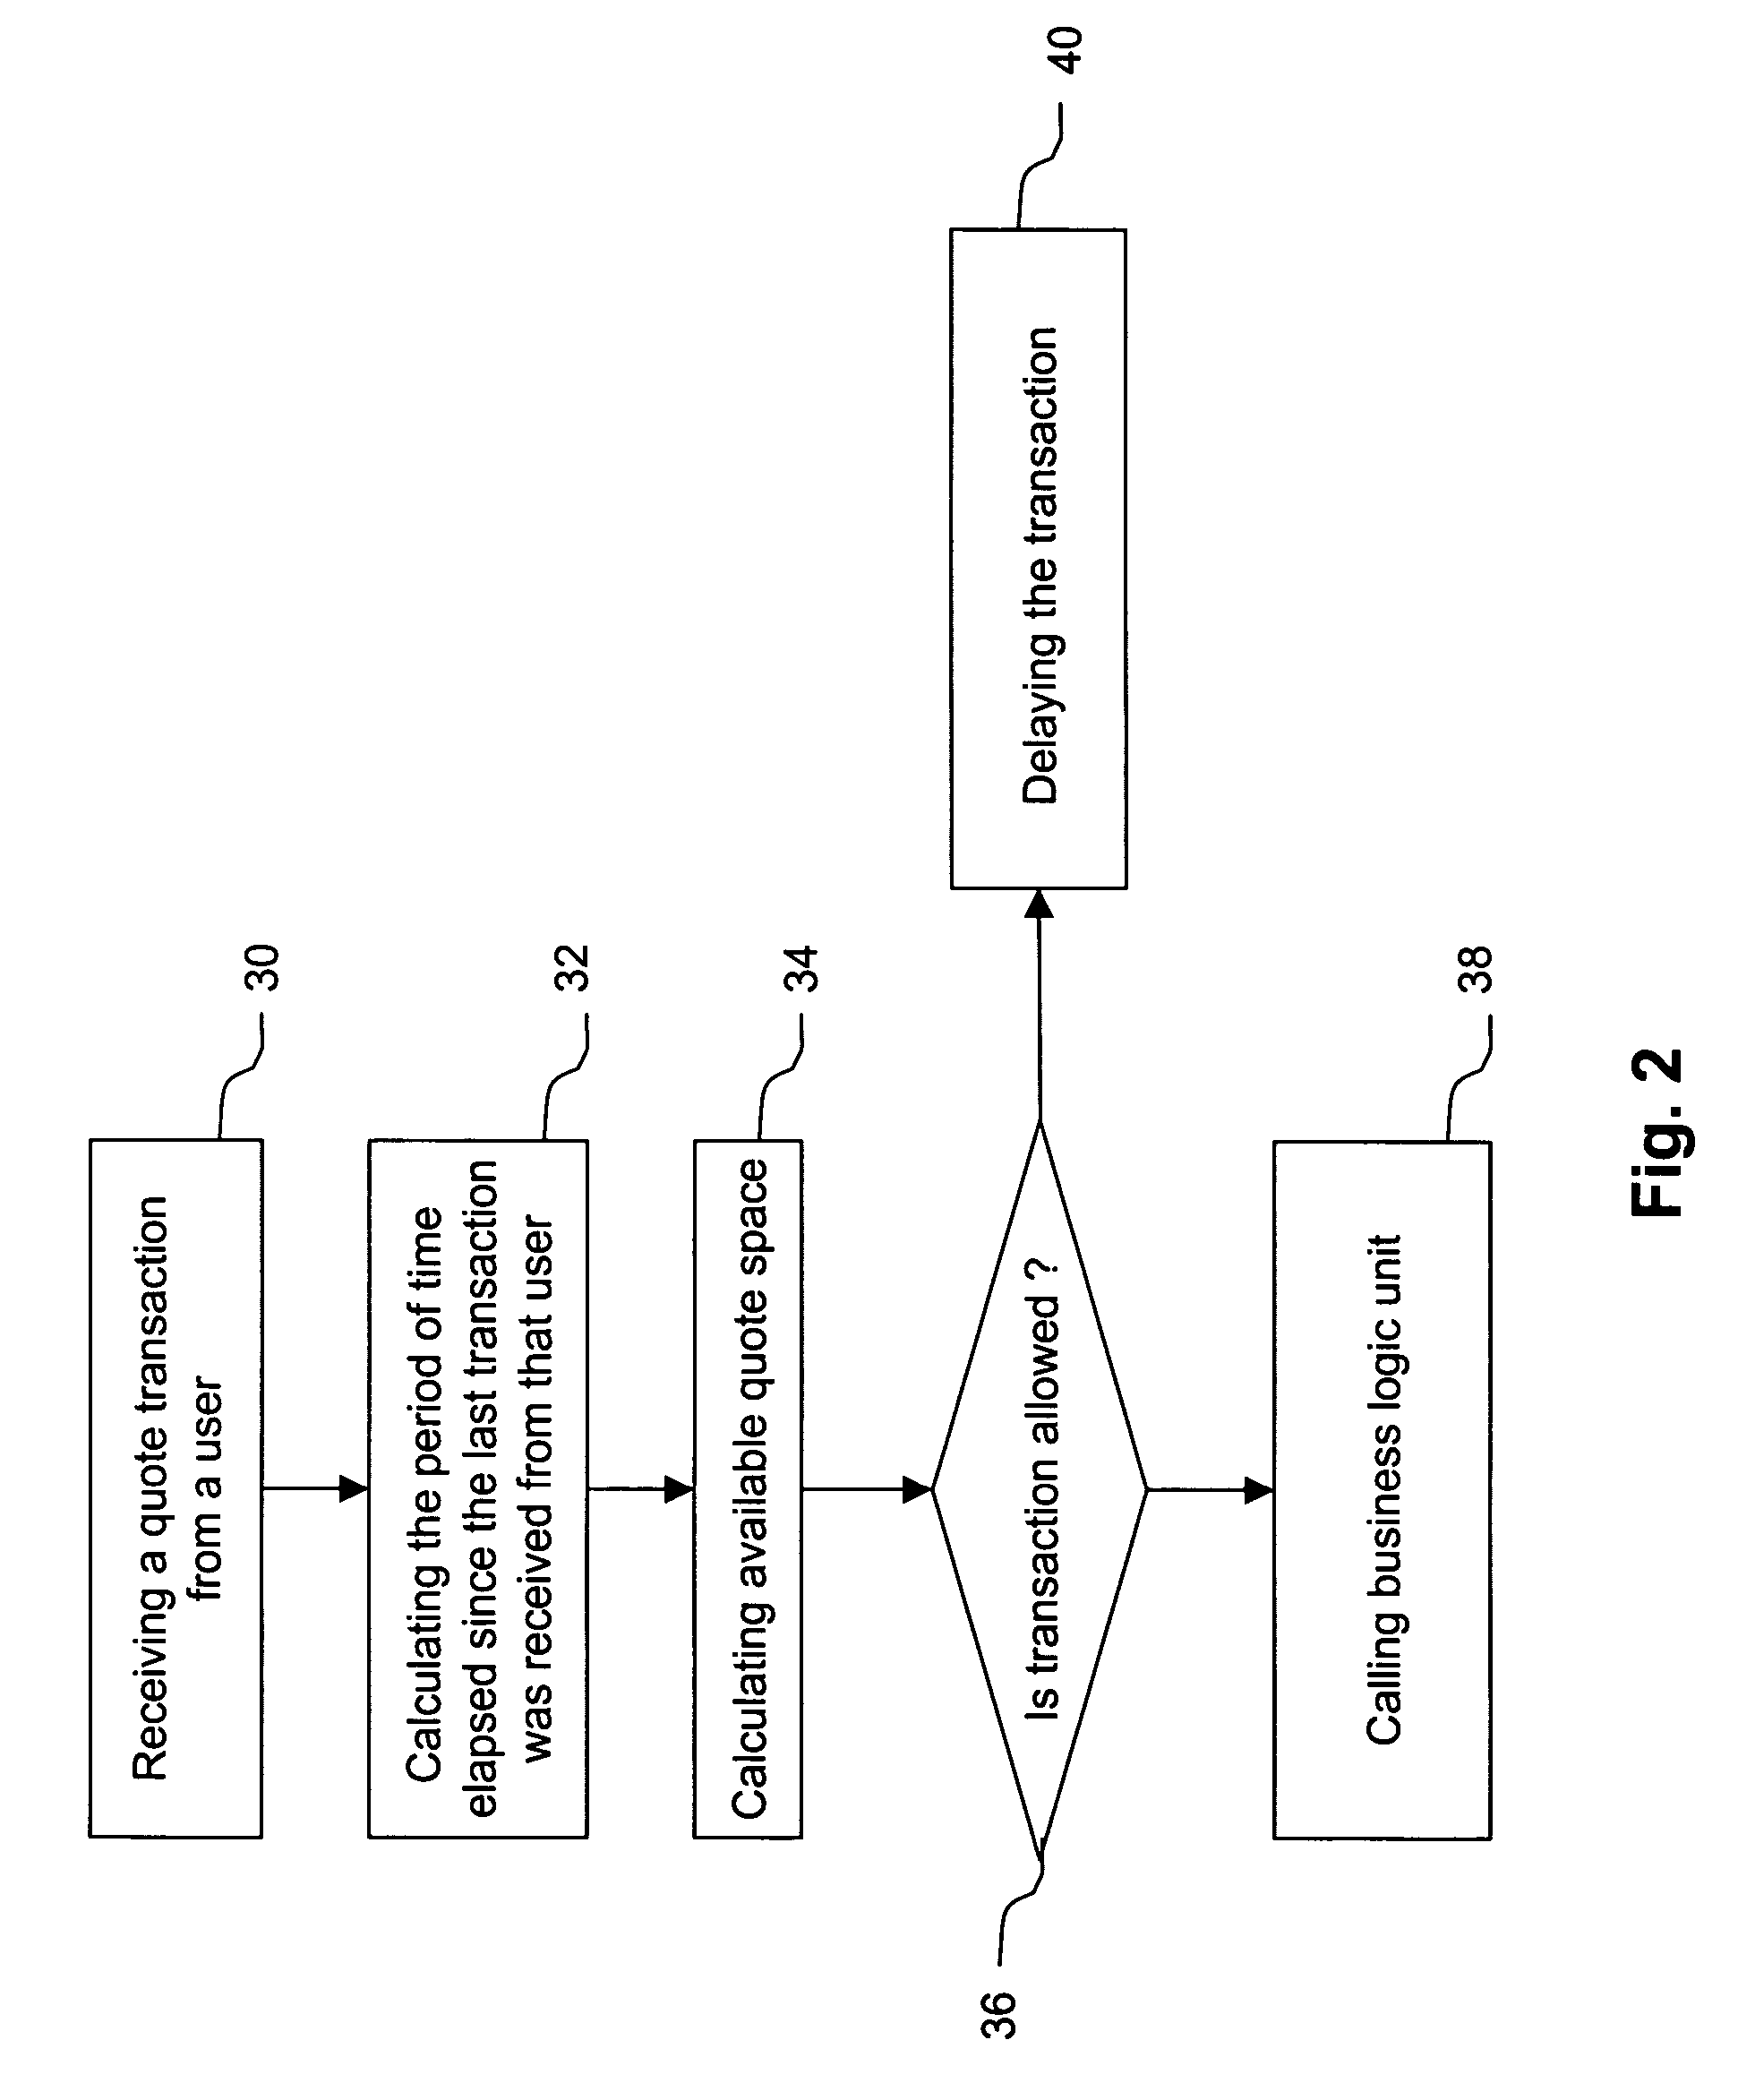 Systems and methods for preventing server and network overload